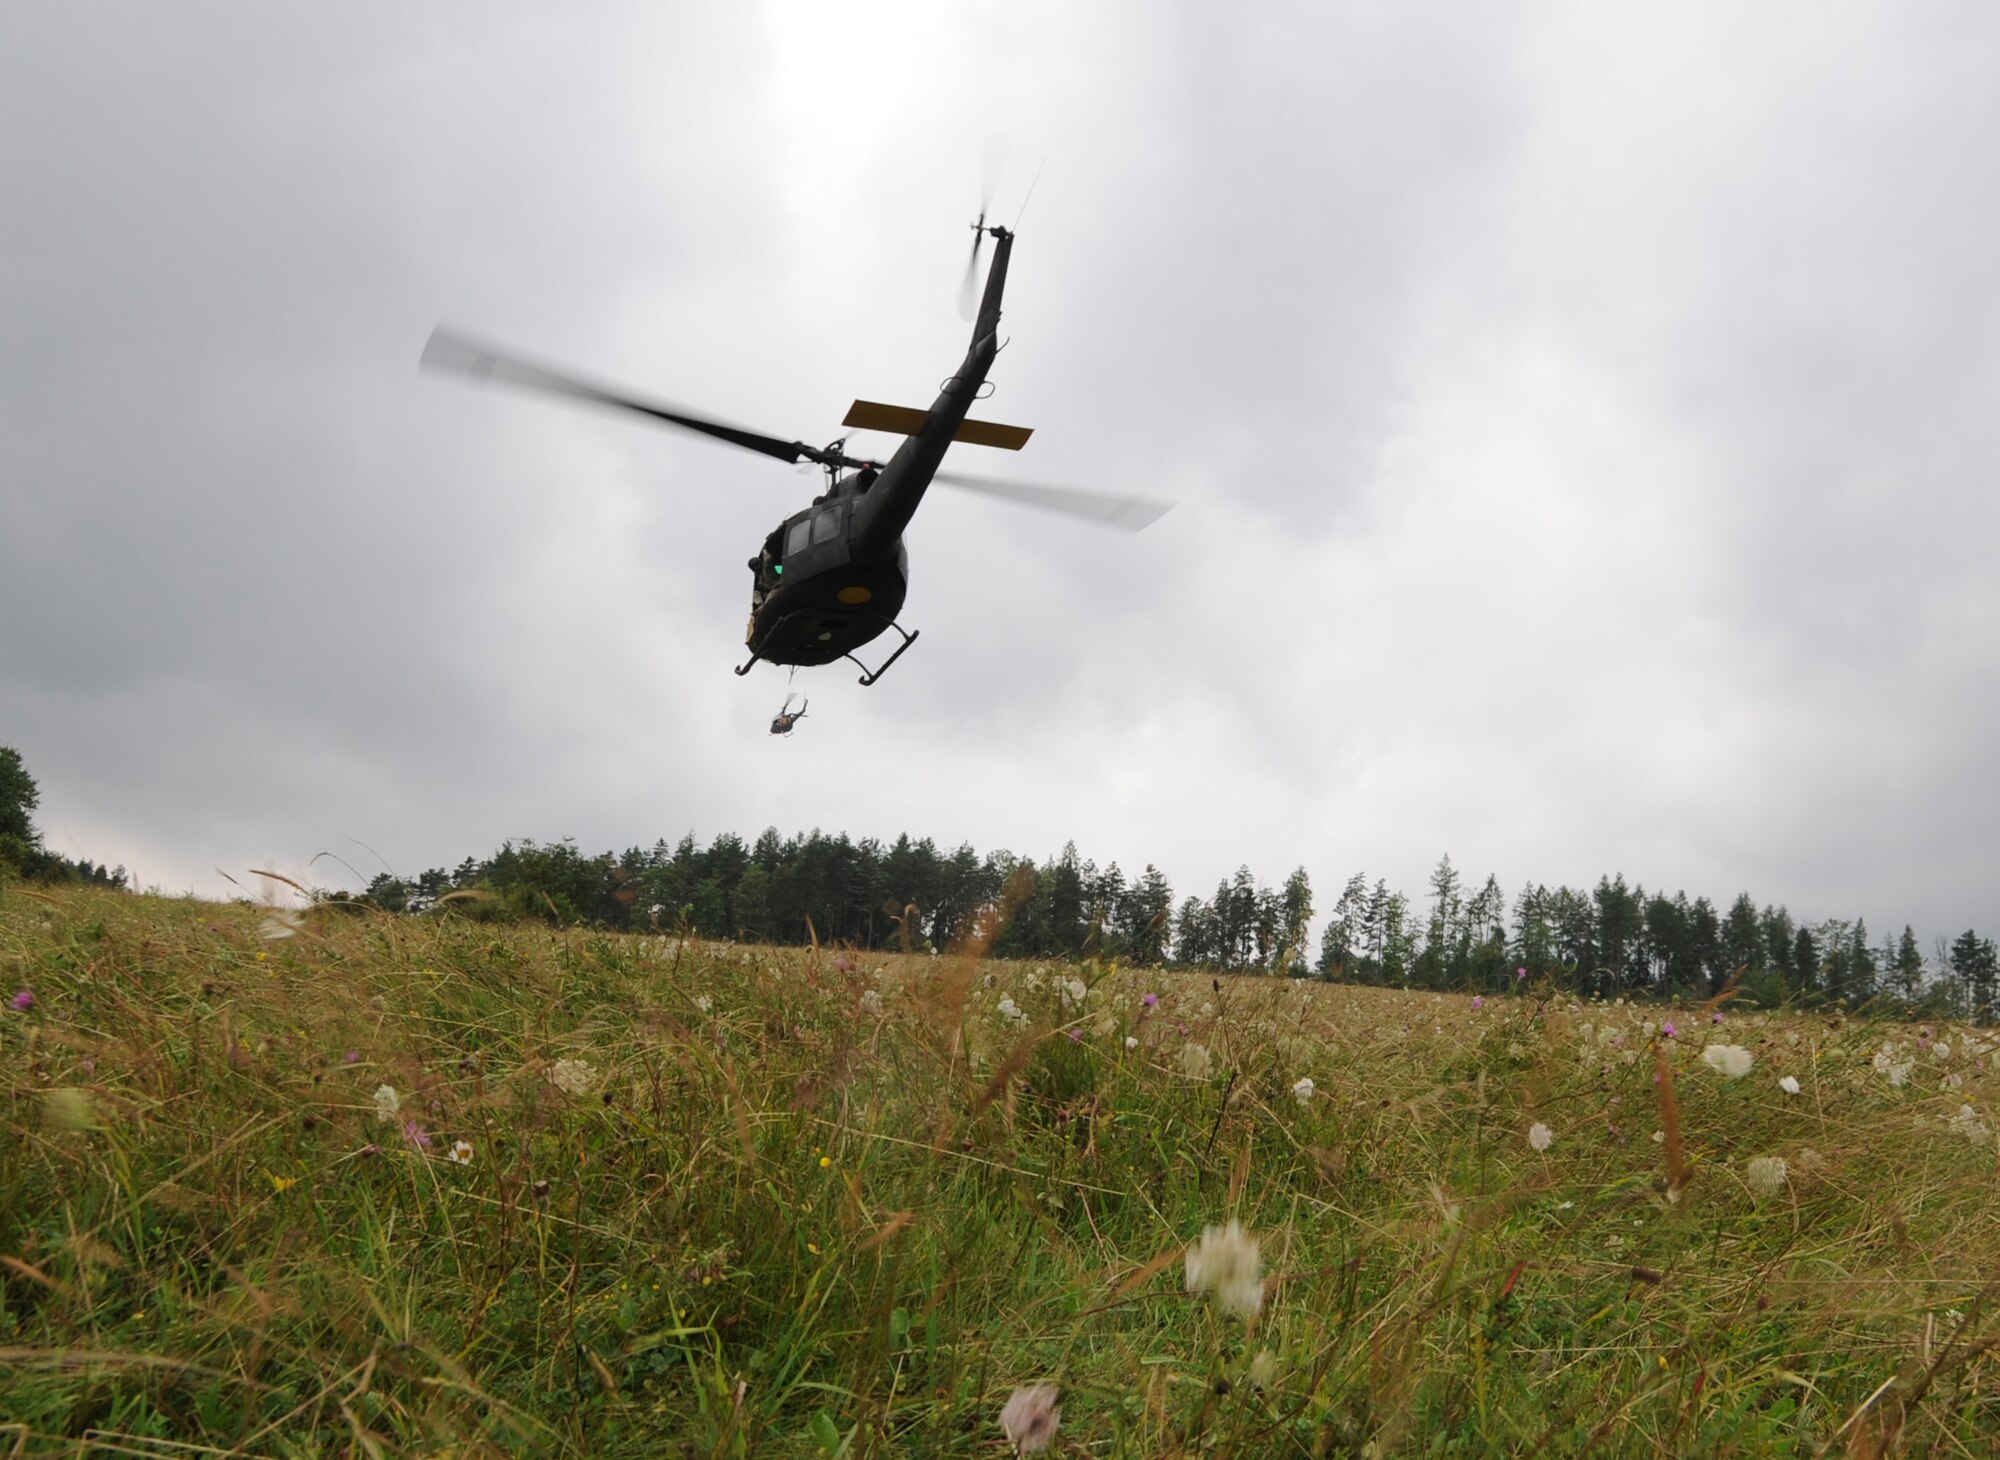 Huey's leave the landing zone after an air assault mission scenario during exercise ALLIED STRIKE 10, Hohenfels, Germany, Aug. 3, 2010. AS 10 is Europe's premier close air support (CAS) exercise, held annually to conduct robust, realistic CAS training that helps build partnership capacity among allied North Atlantic Treaty Organization nations and joint services while refining the latest operational CAS tactics. For more ALLIED STRIKE information go to www.usafe.af.mil/alliedstrike.asp. (U.S. Air Force photo by Senior Airman Caleb Pierce)